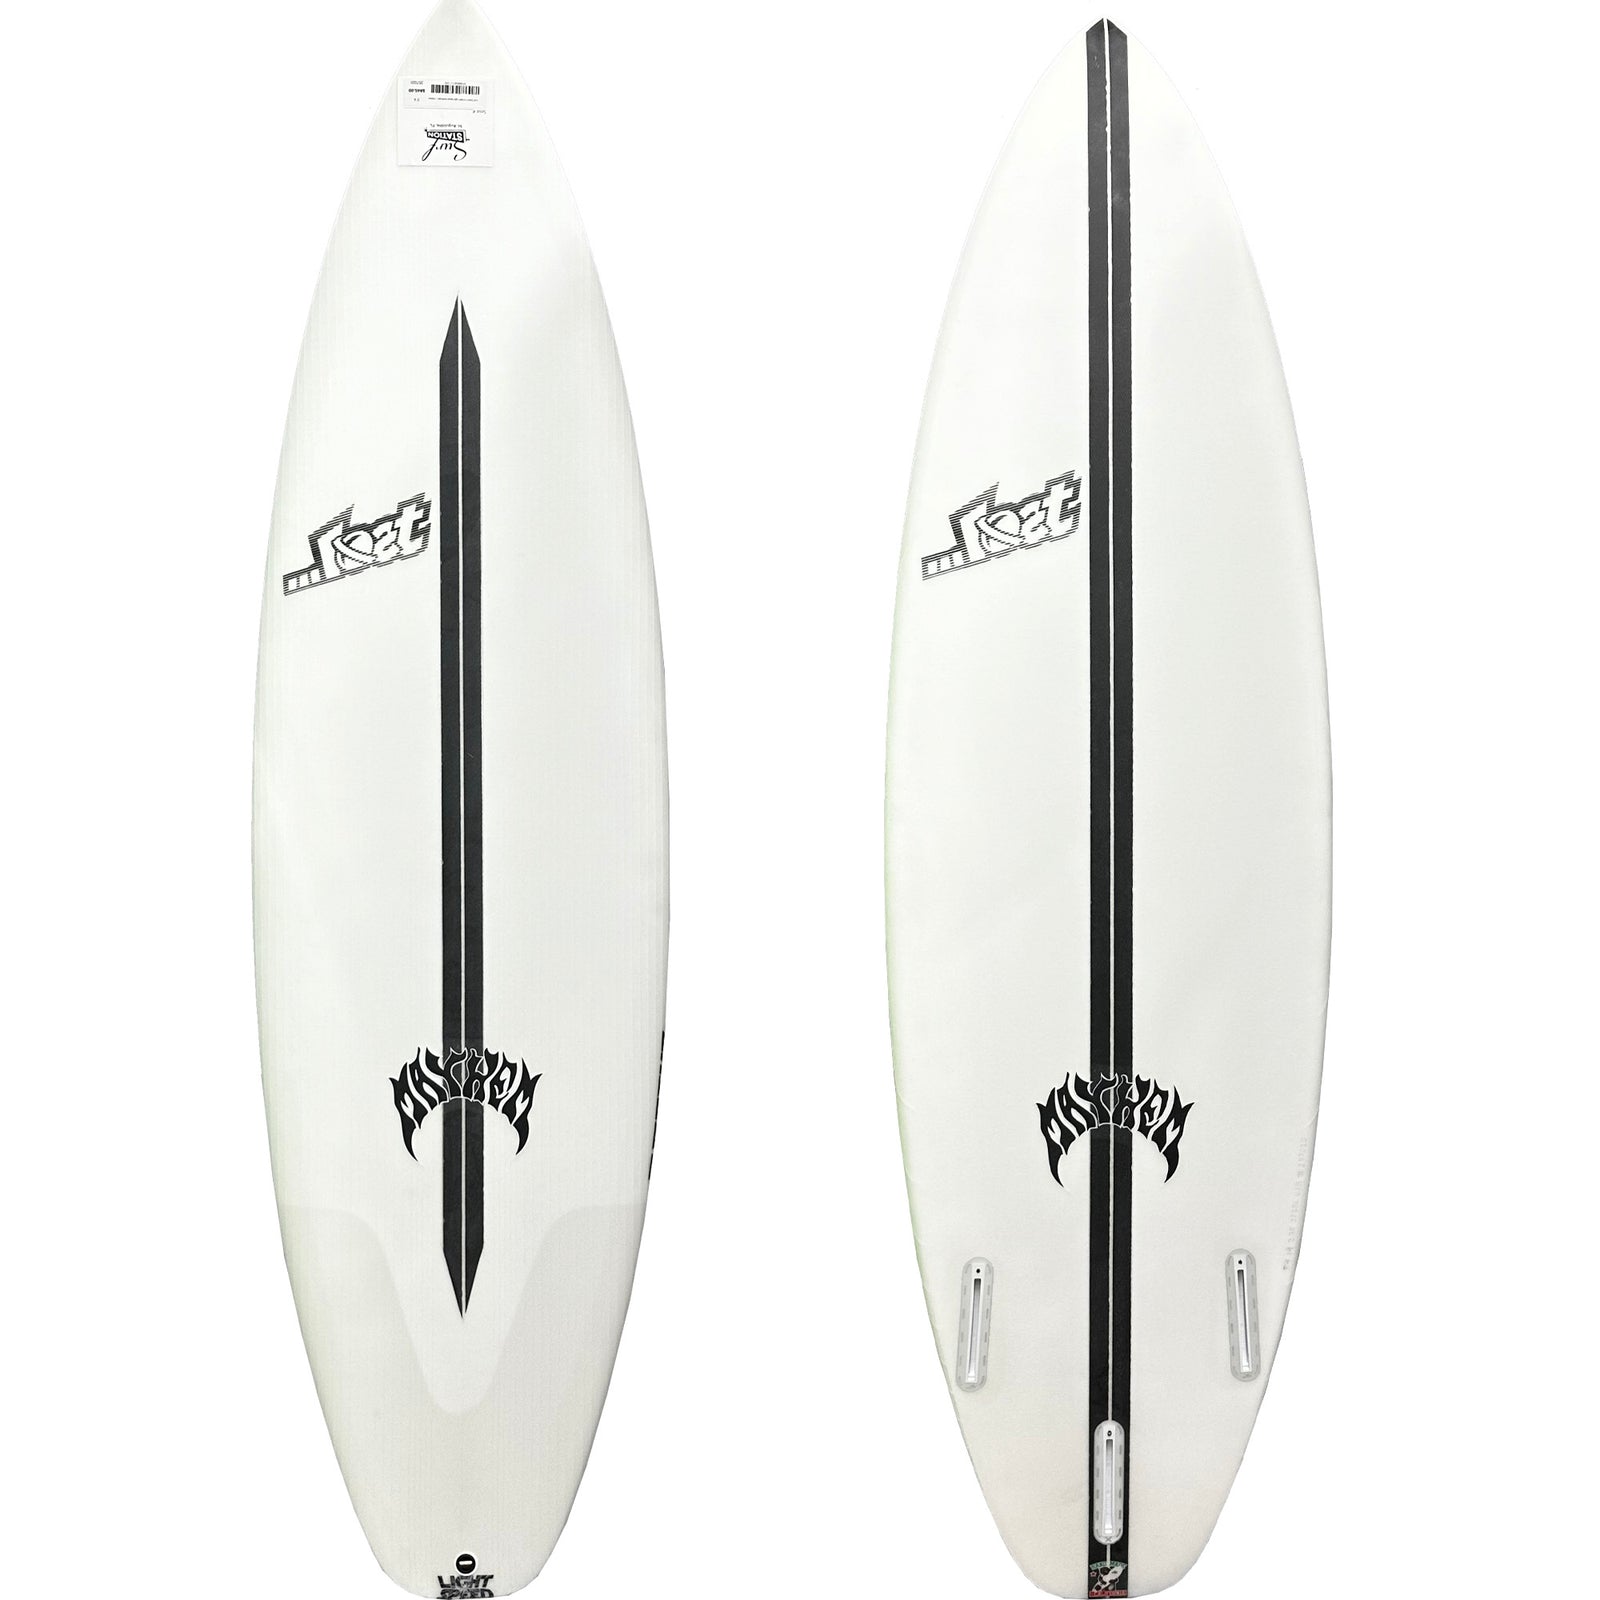 Lost Driver 3.0 Surfboard - Surf Station Store